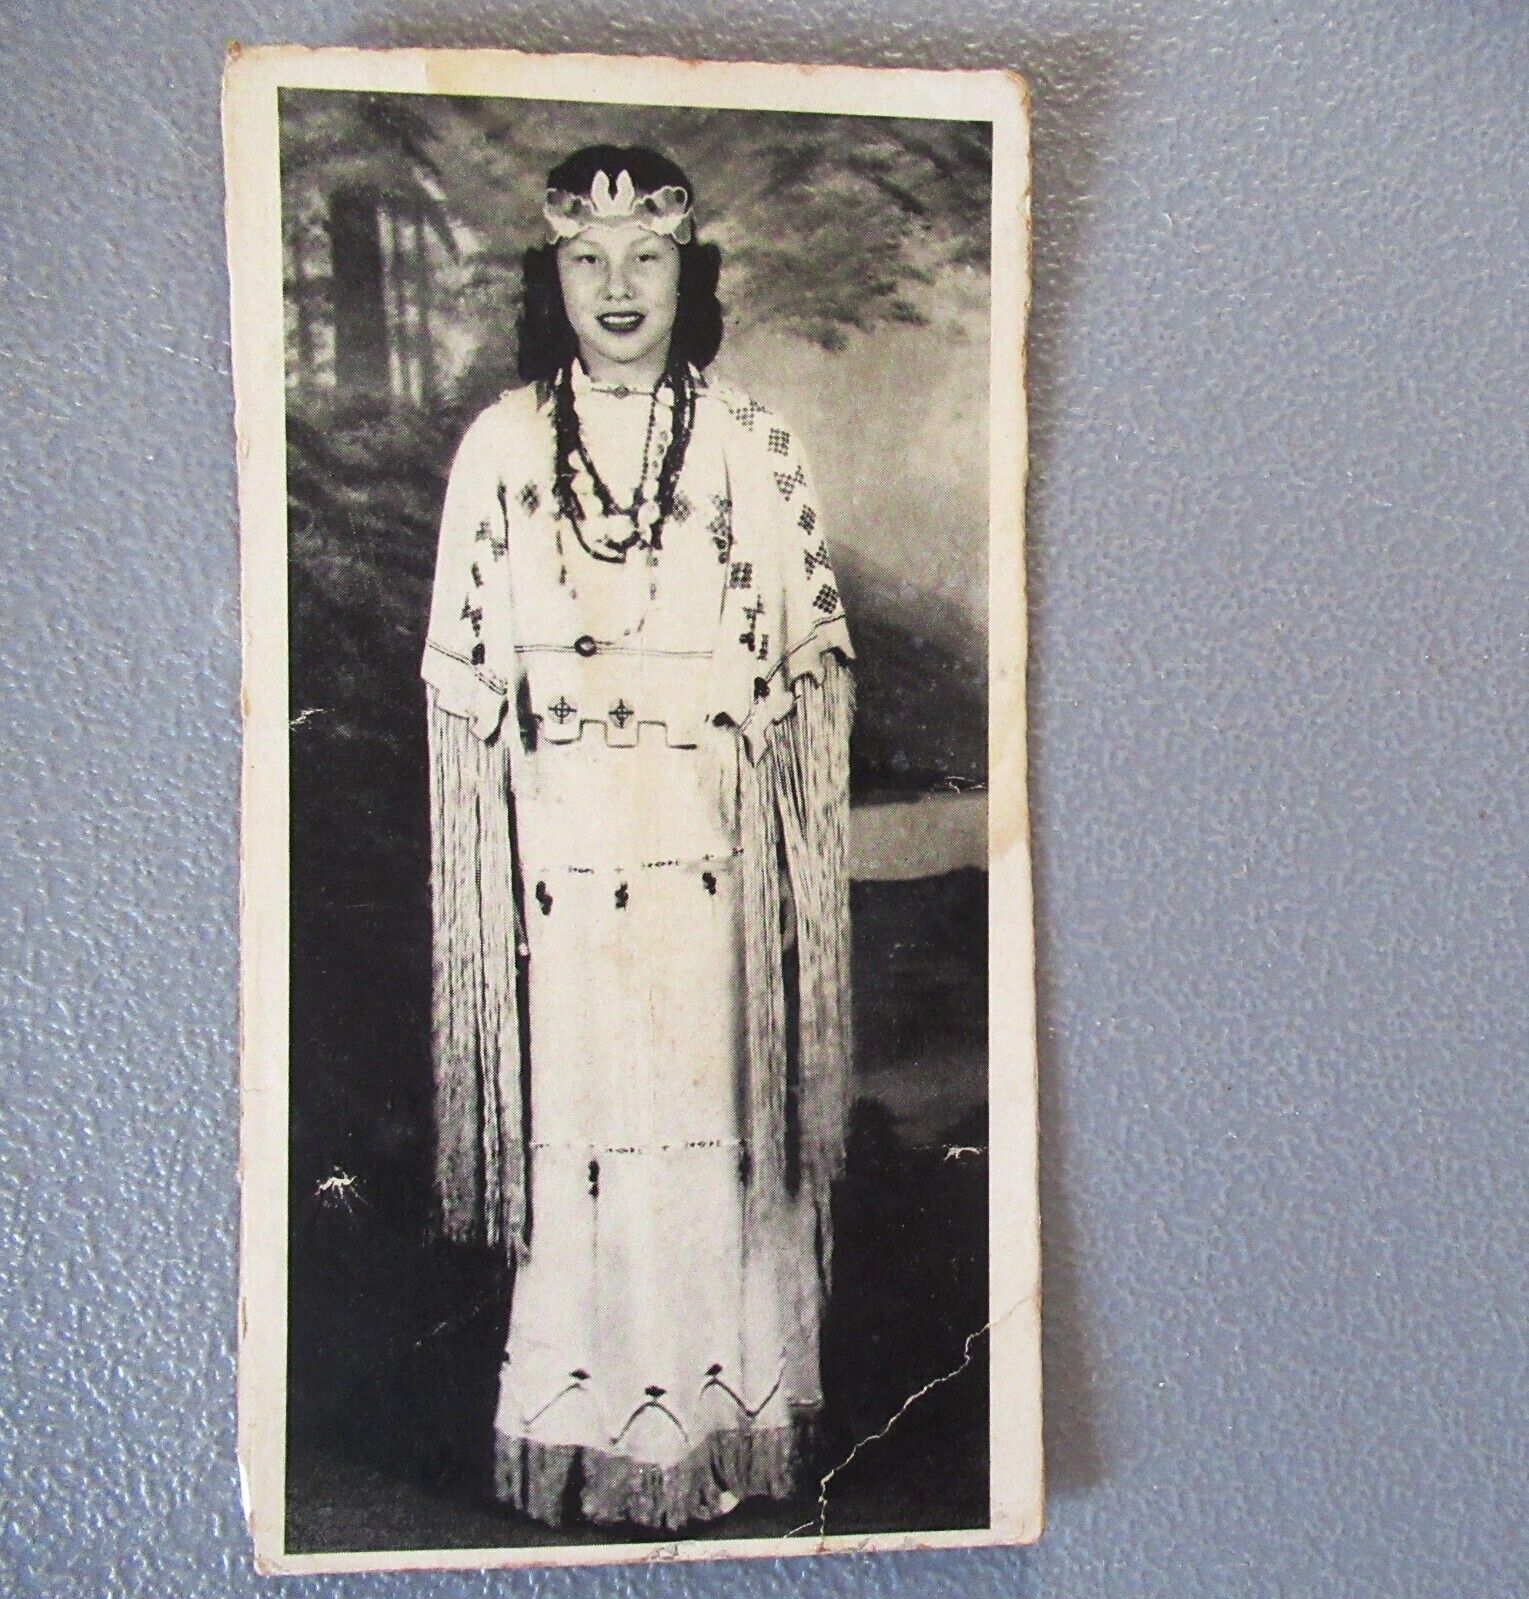 VINTAGE CHEROKEE NATIVE AMERICAN YOUNG GIRL/WOMAN IN TRIBAL DRESS * B&W PHOTO